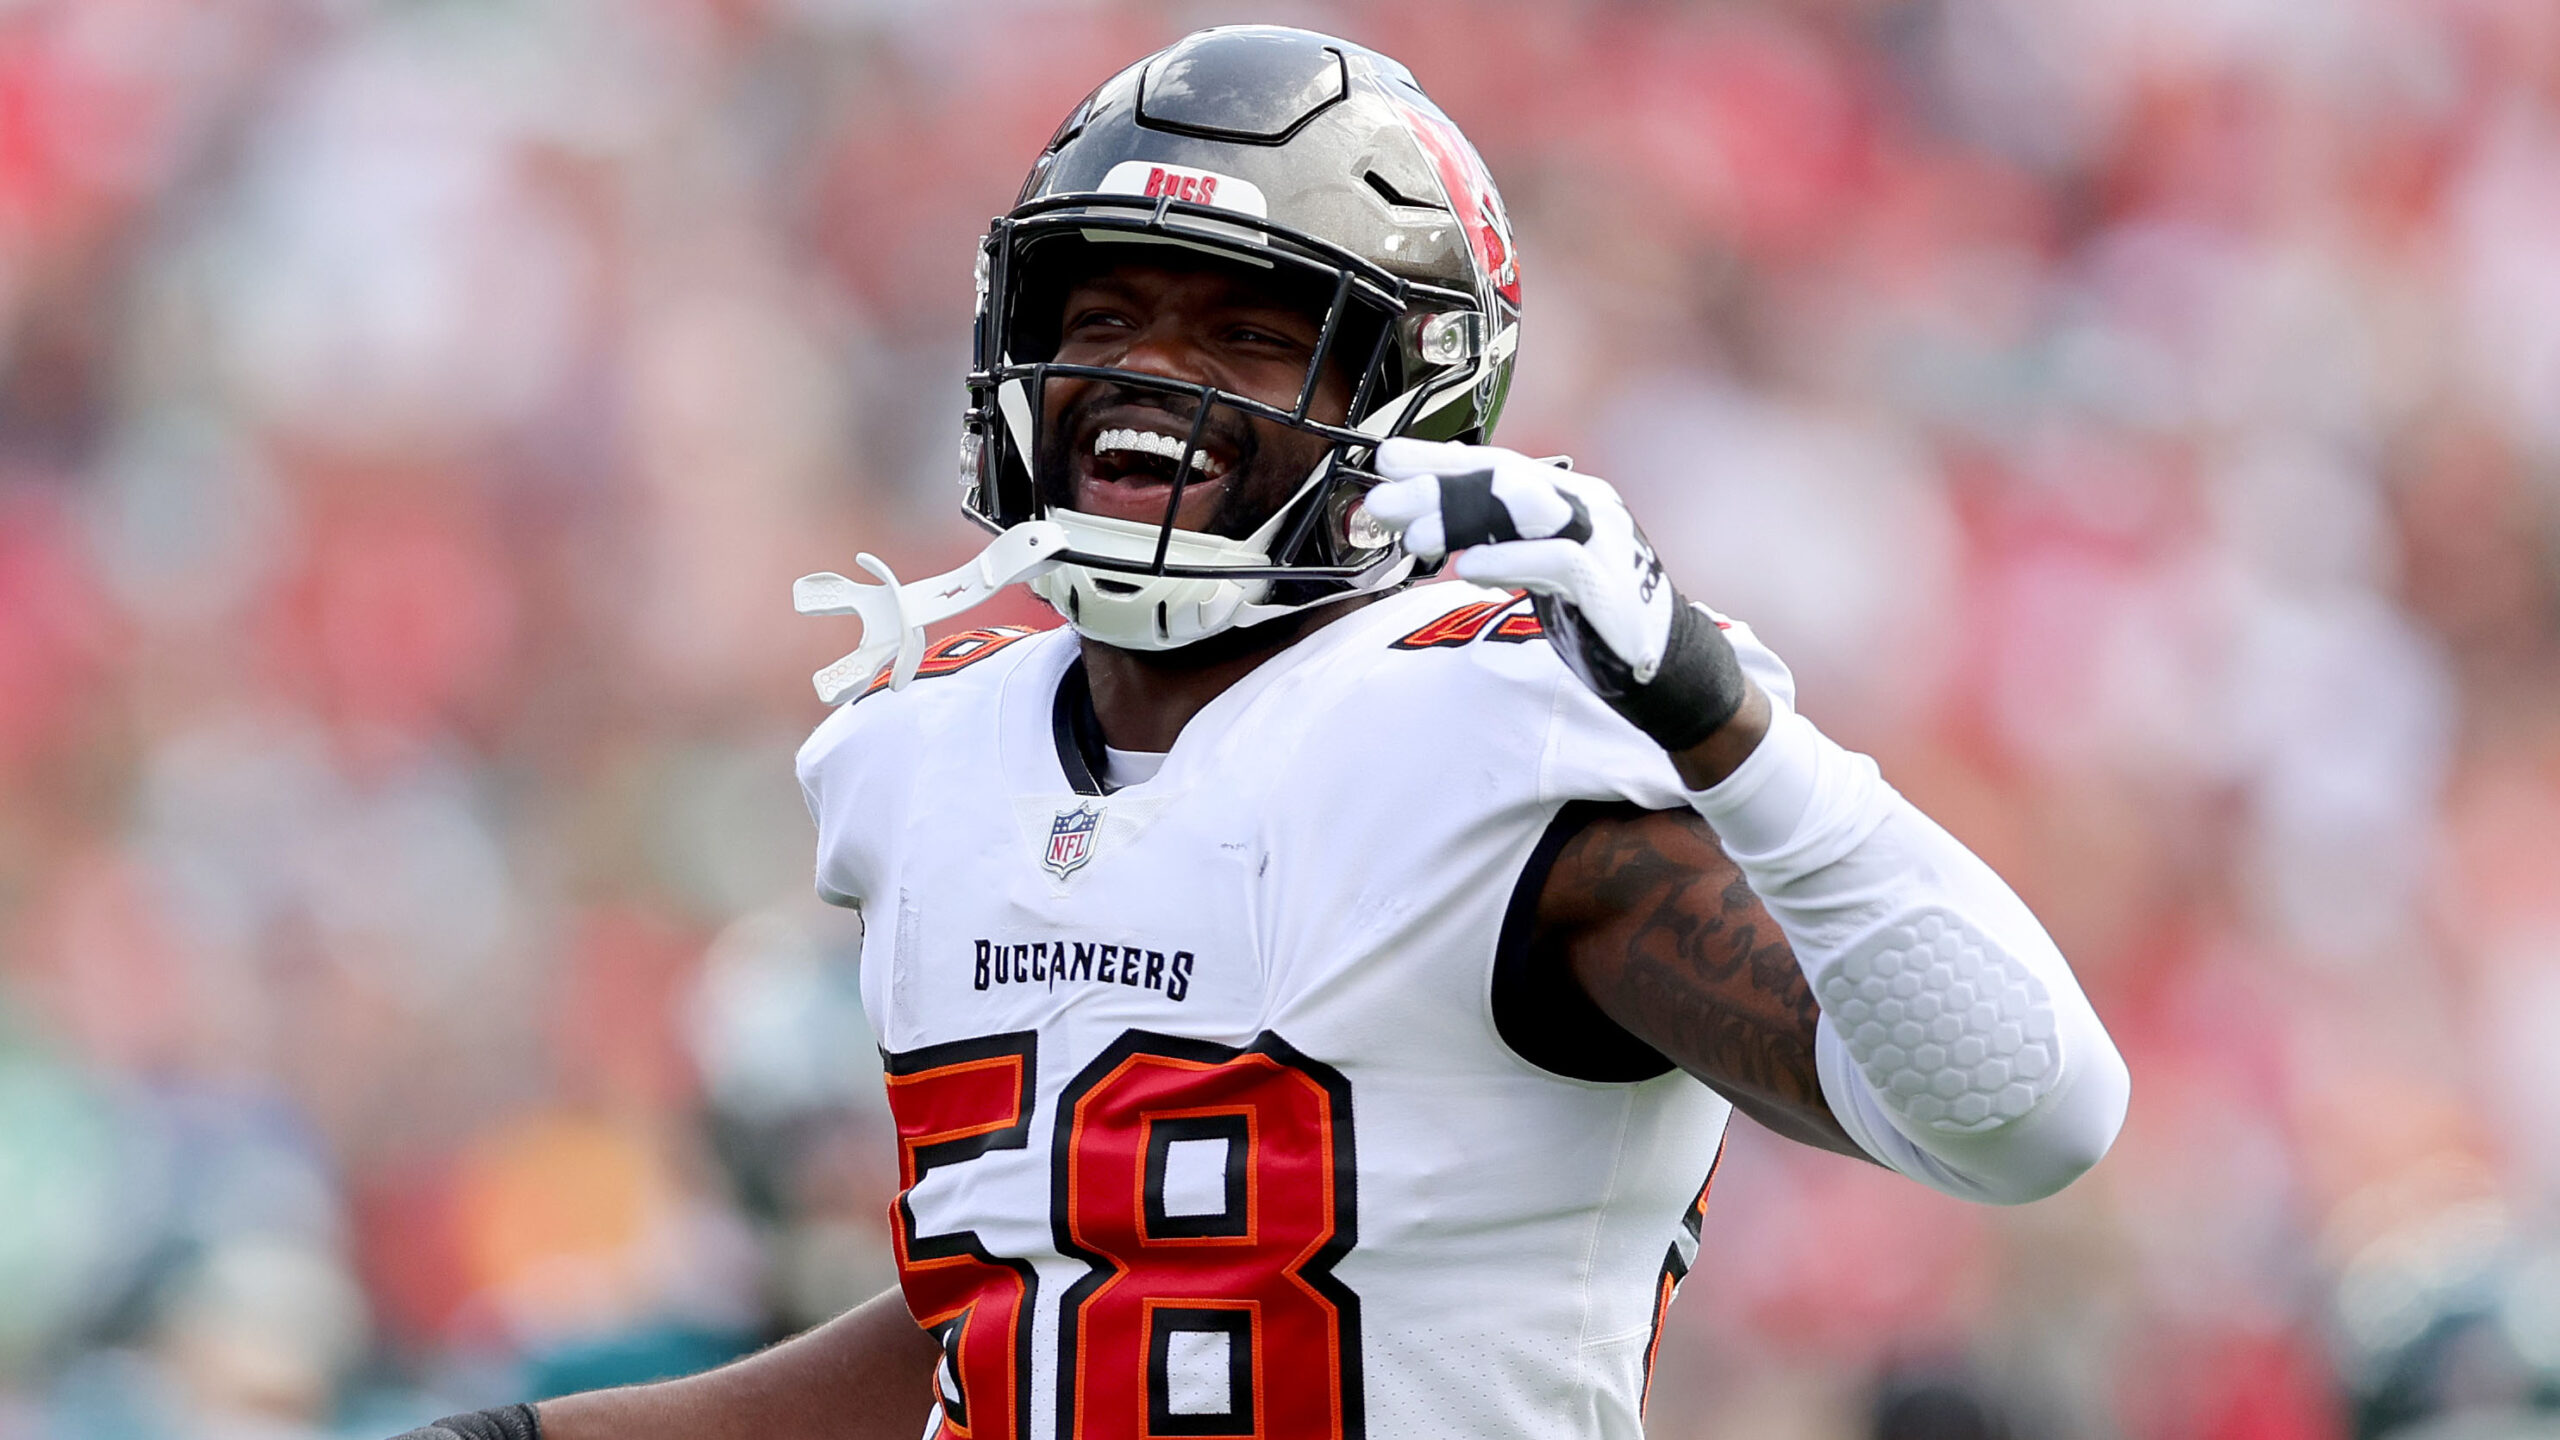 Tampa Bay Buccaneers Star Linebacker’s 2-Year-Old Daughter Dies In Drowning Accident: Reports